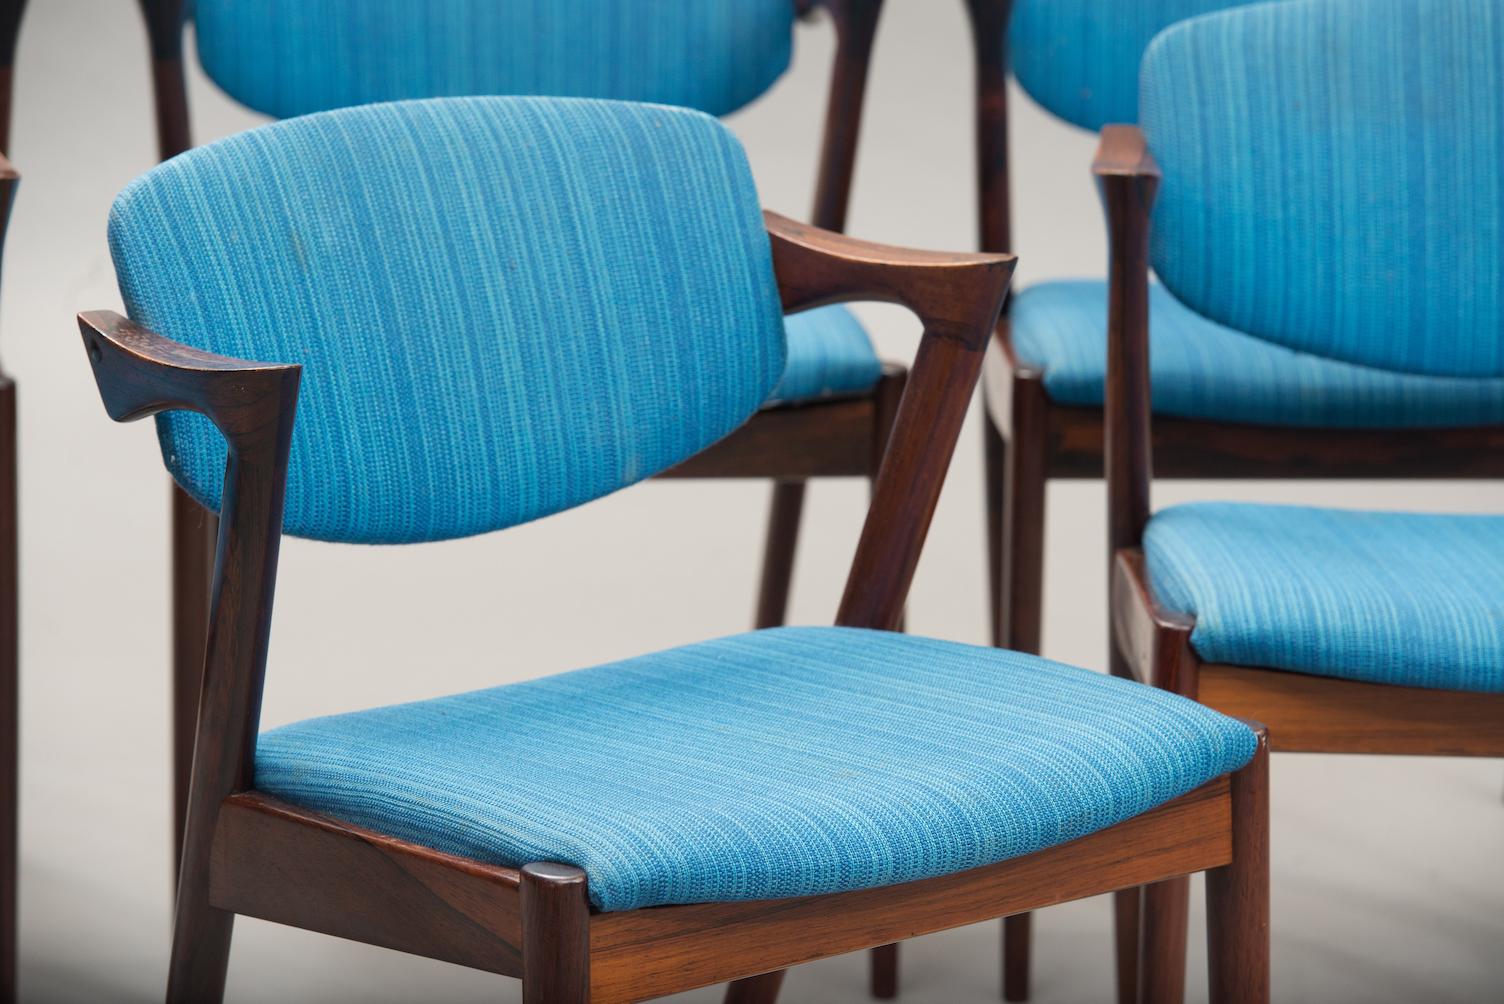 Varnished Kai Kristiansen Rosewood Dining Chairs, Model 42, Set of Six, 1960s.